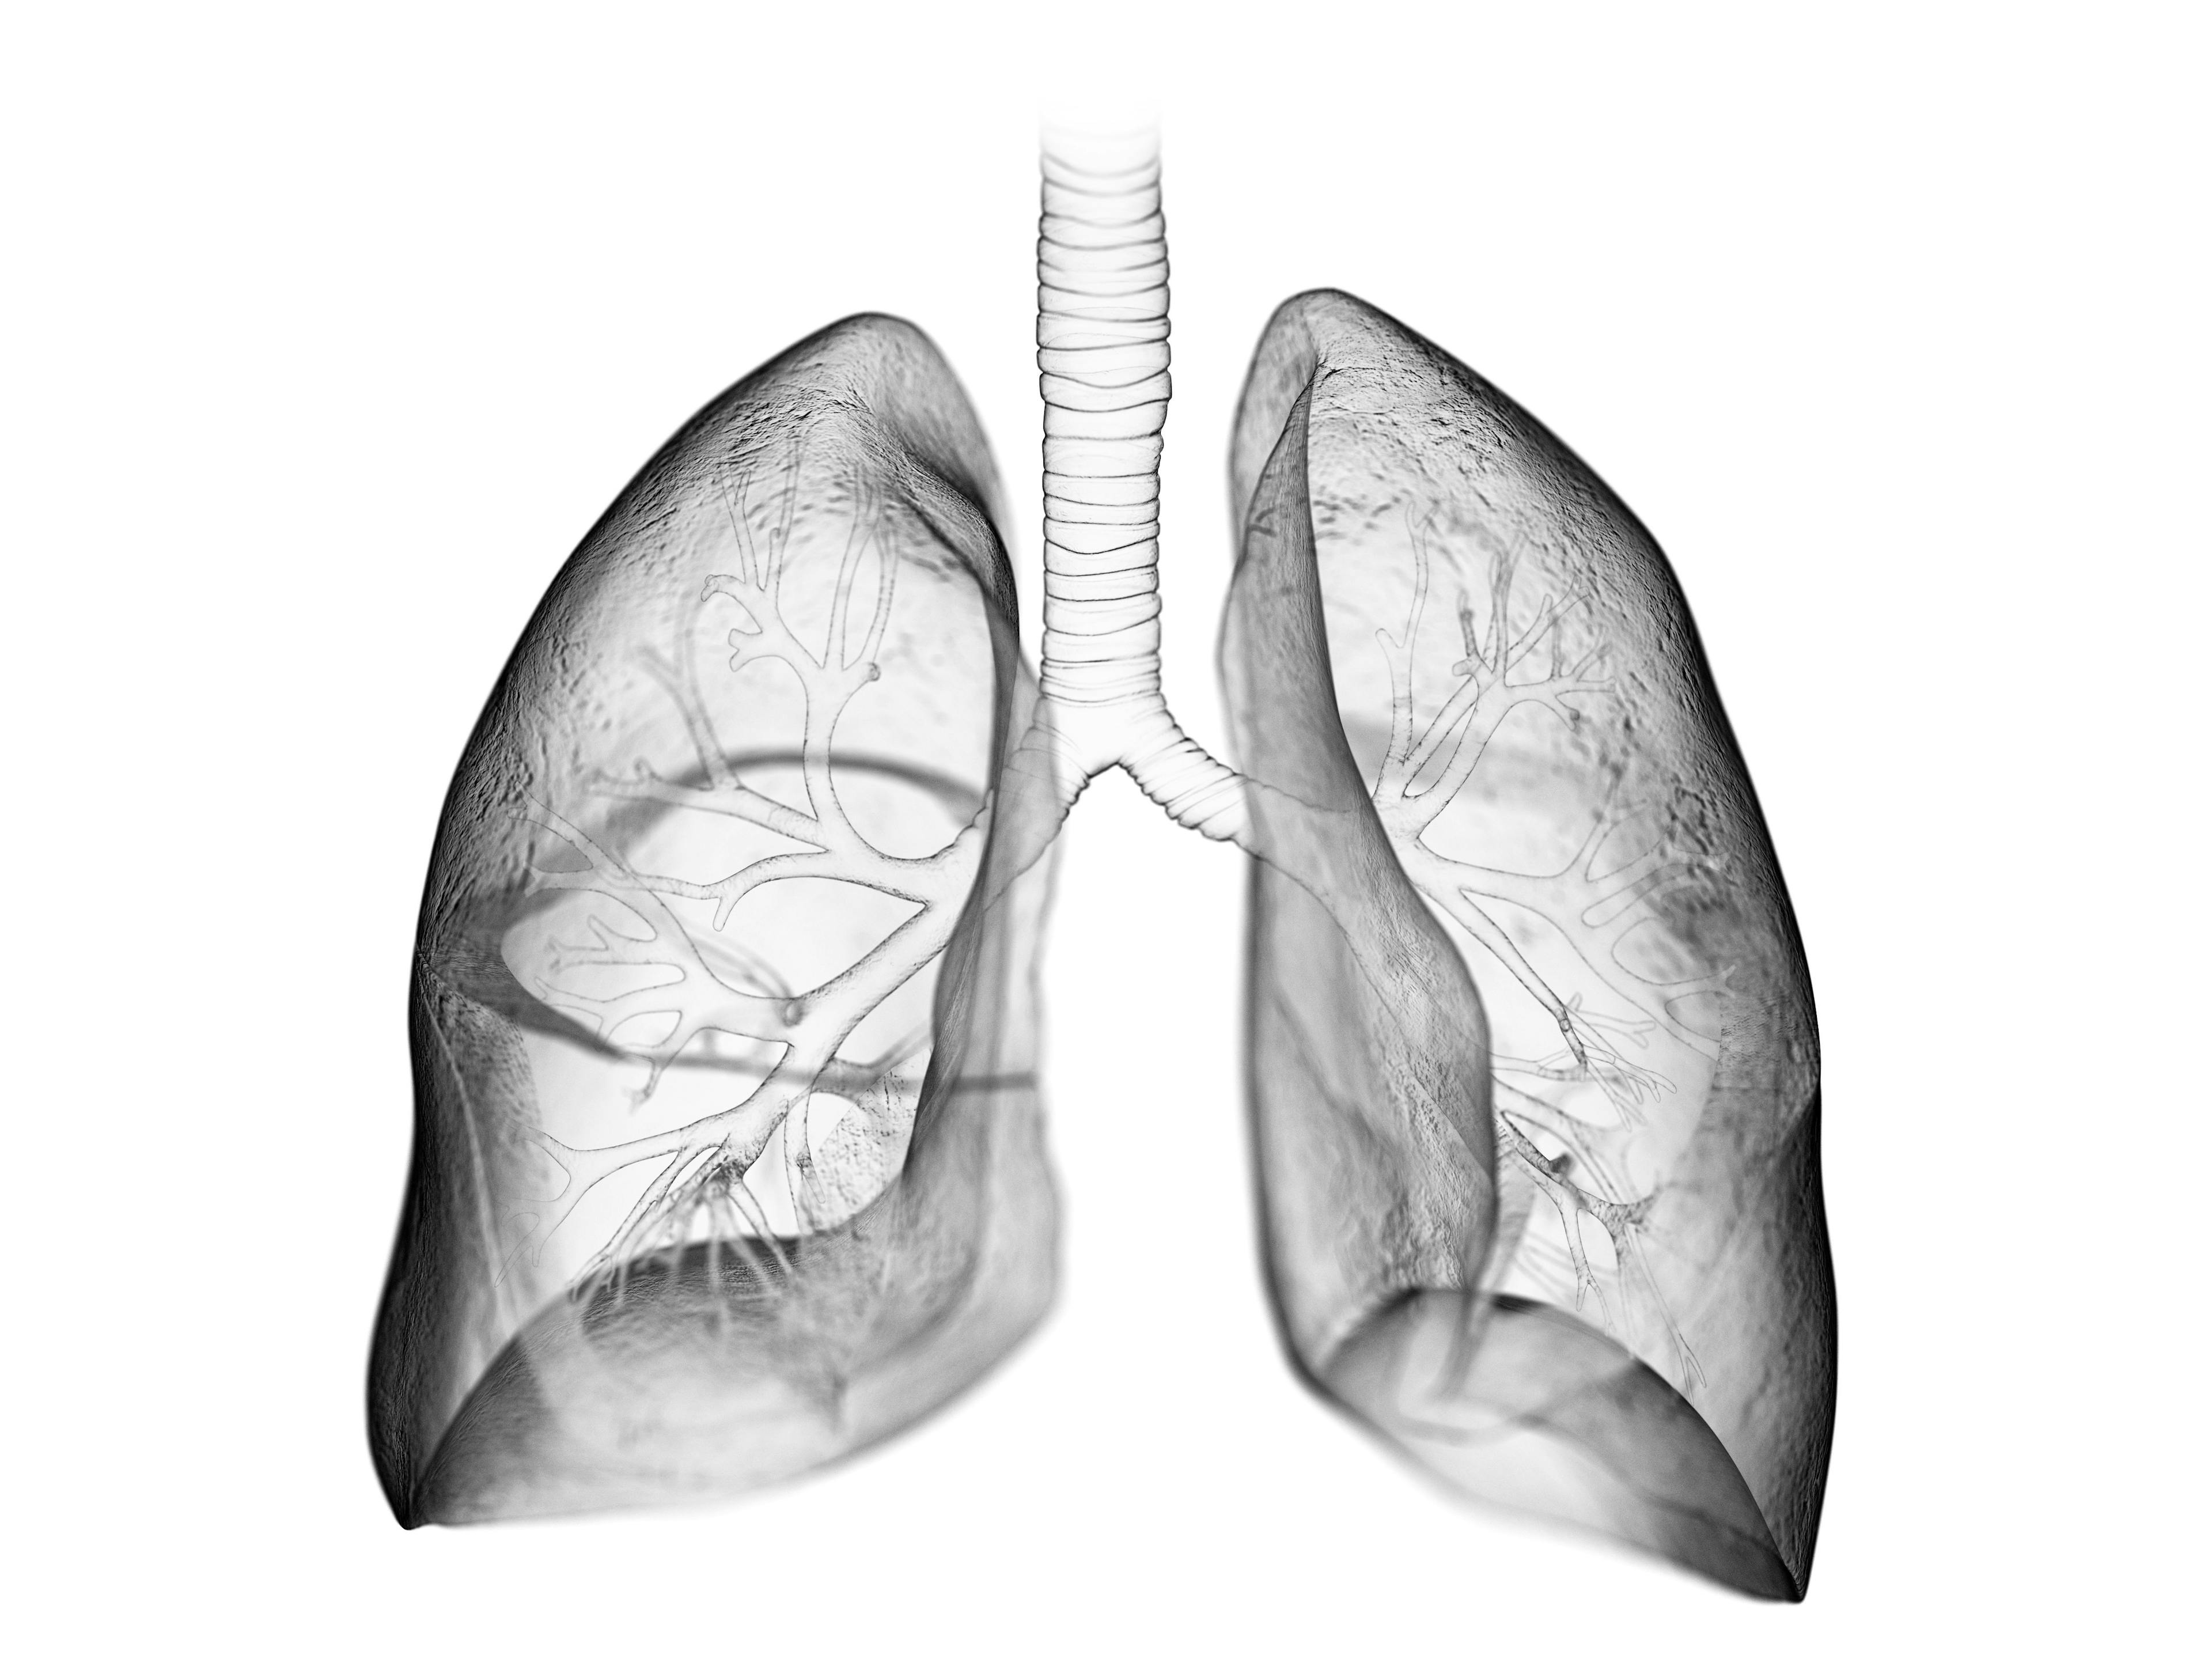 Ninfetanib Improves and Stabilizes Lung Function in Systemic Sclerosis